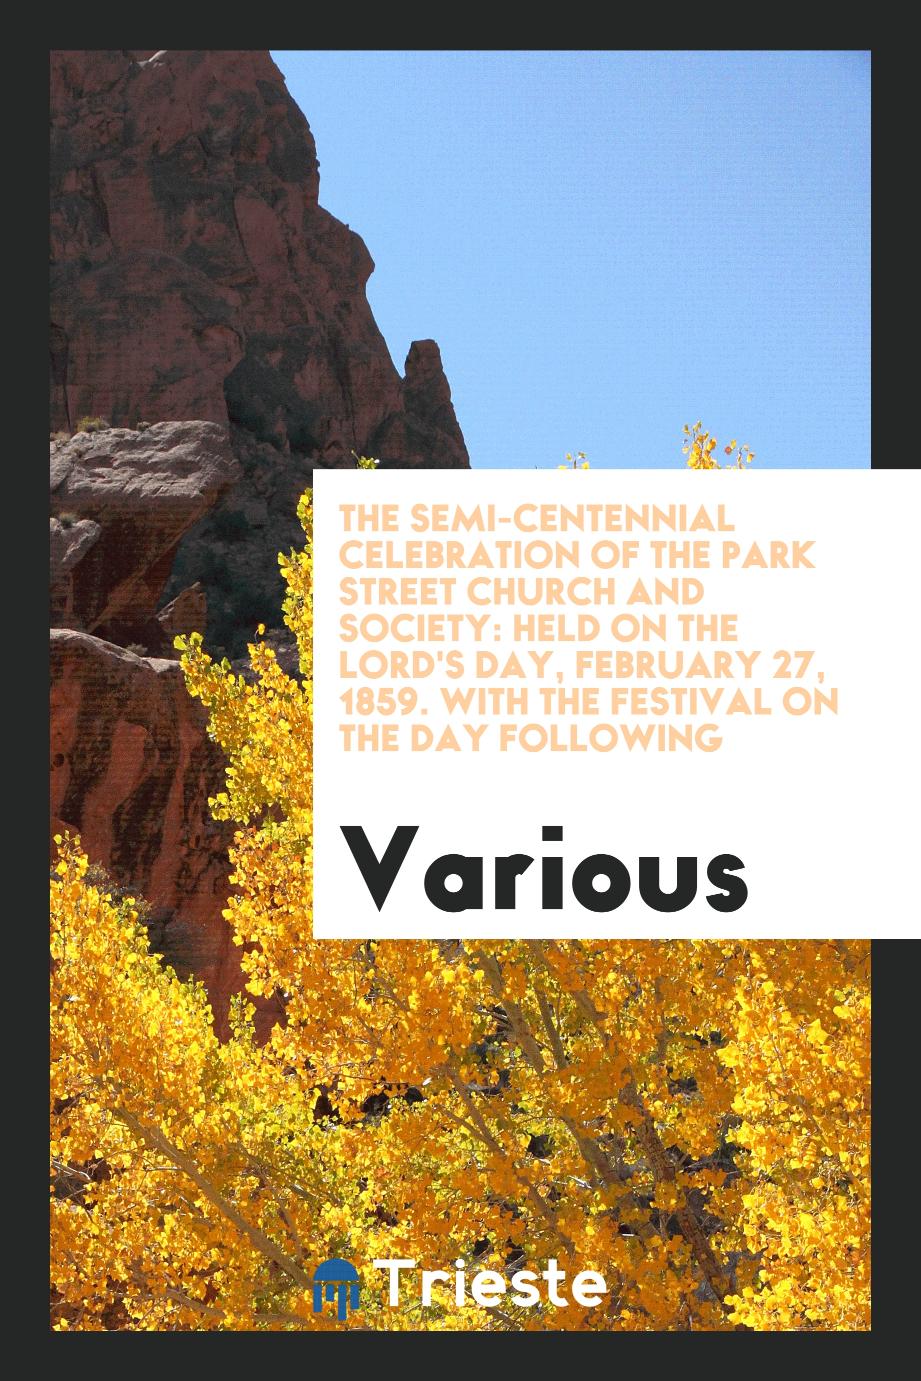 The Semi-Centennial Celebration of the Park Street Church and Society: Held on the Lord's Day, February 27, 1859. With the Festival on the Day Following